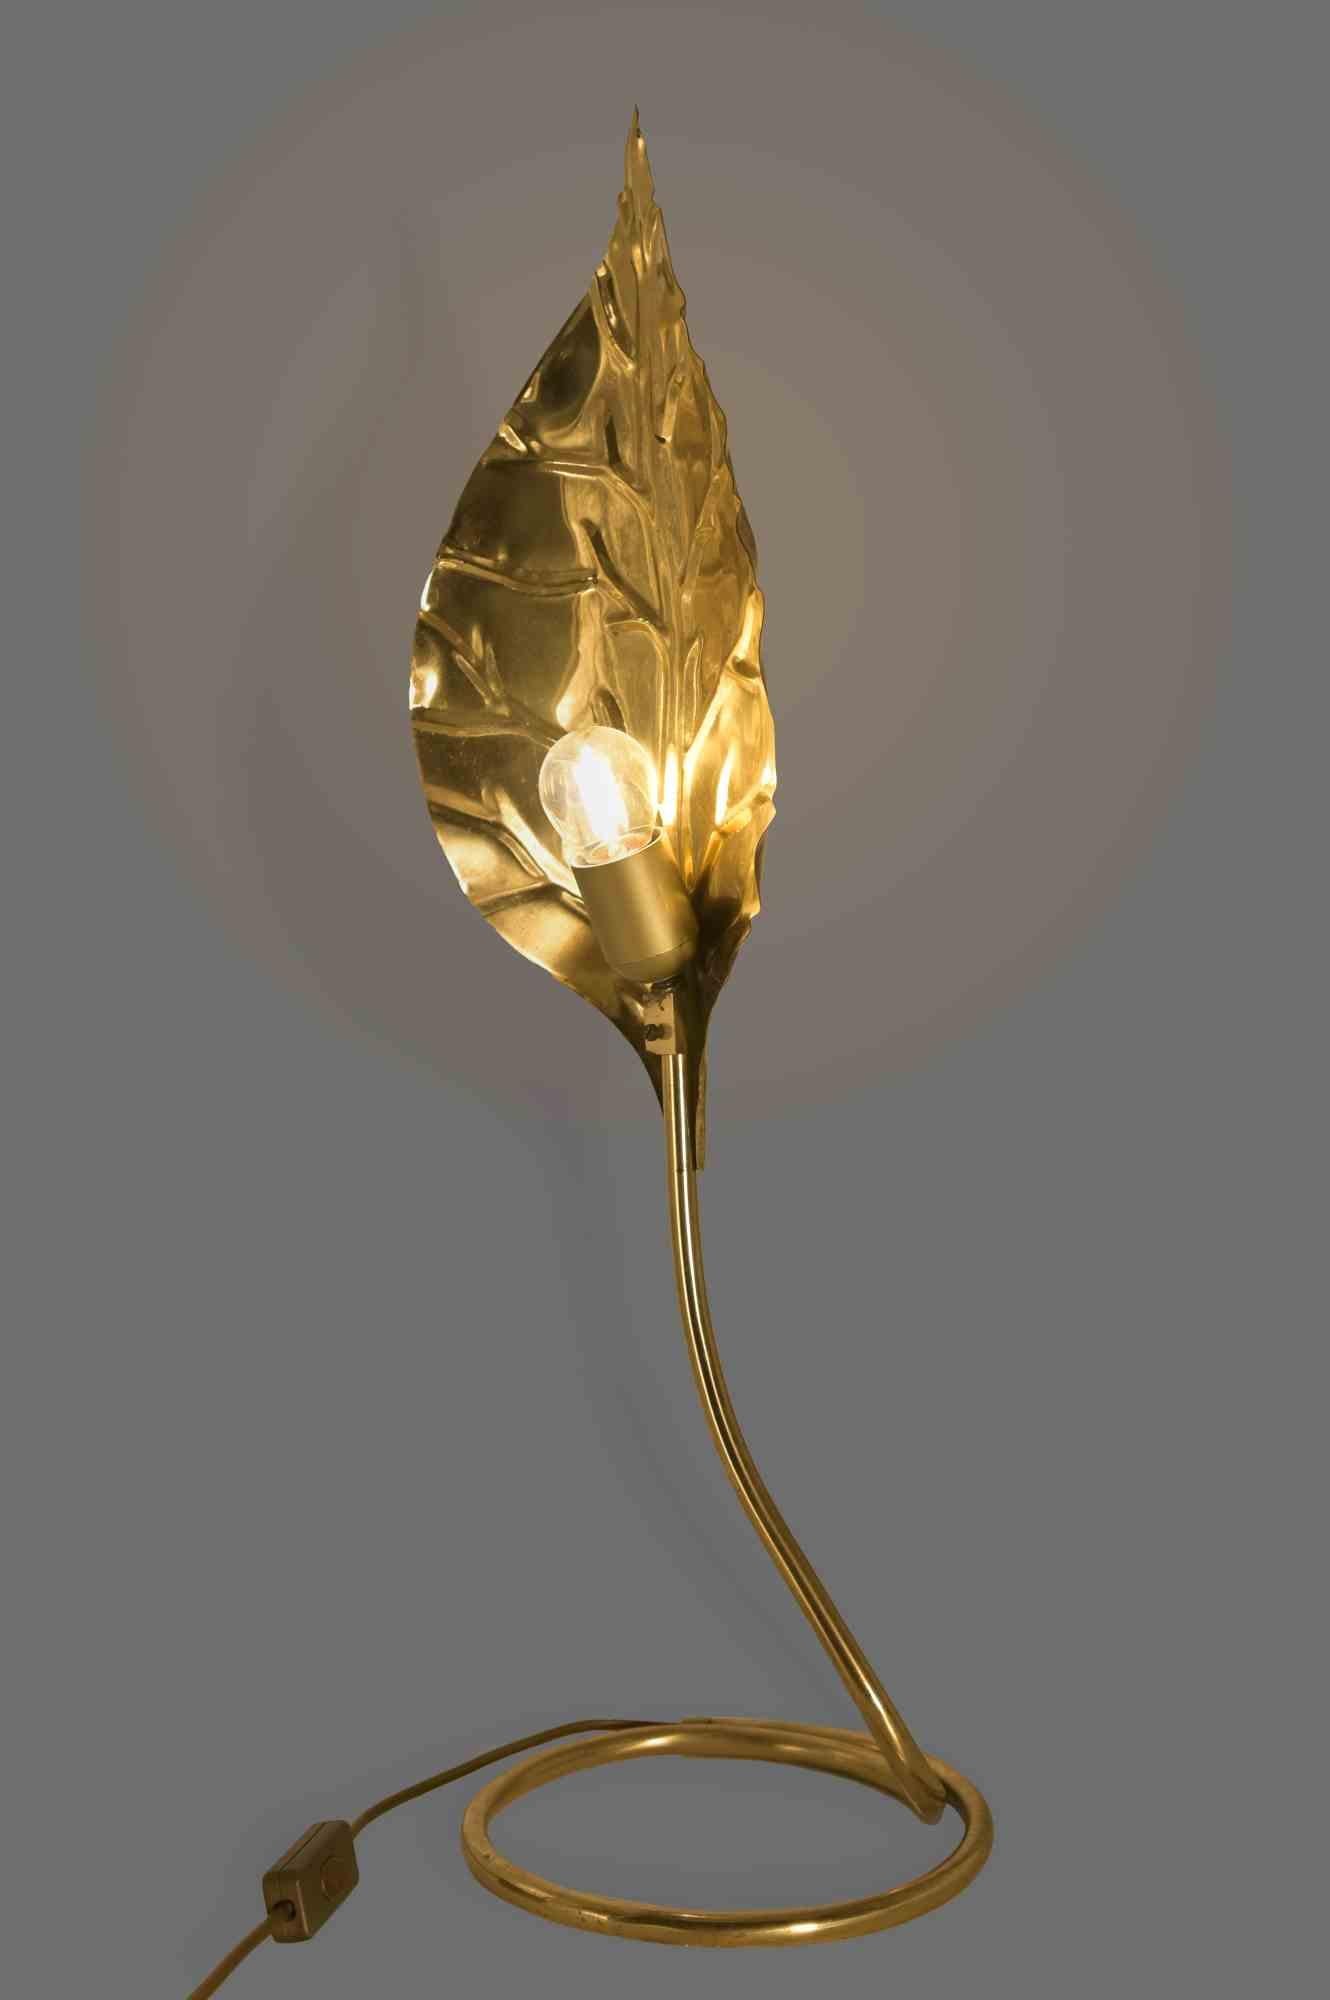 Vintage Brass Lamp Leaf by Tommaso Barbi for Bottega Gadda, Italy 1970s.
H 68 x 19 x 20 cm.
Hand hammered brass.
Good conditions.